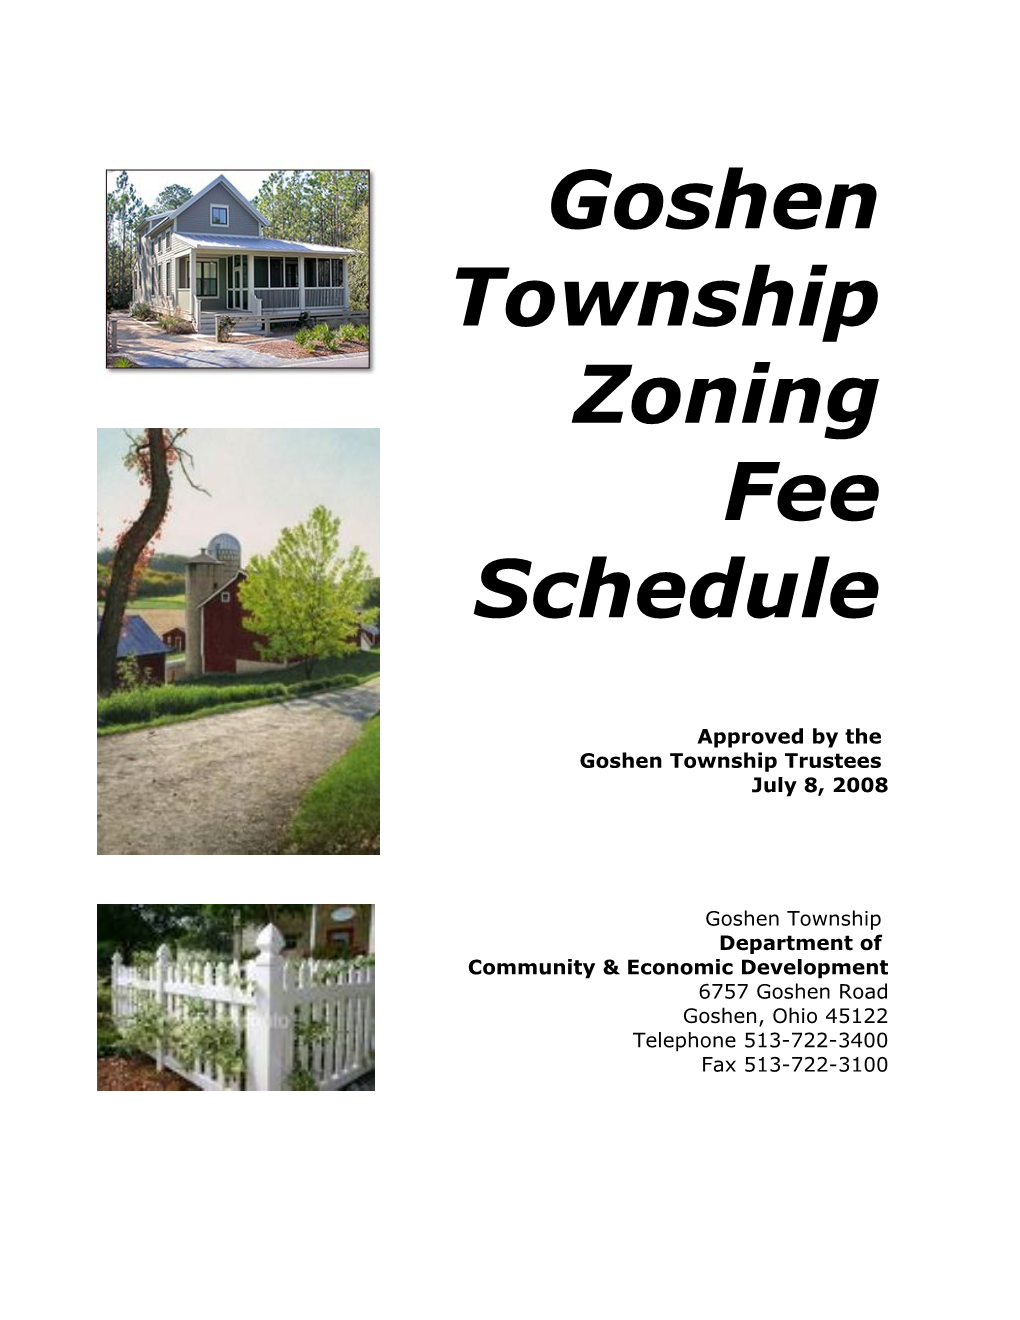 Zoning Applications & Fee Schedules